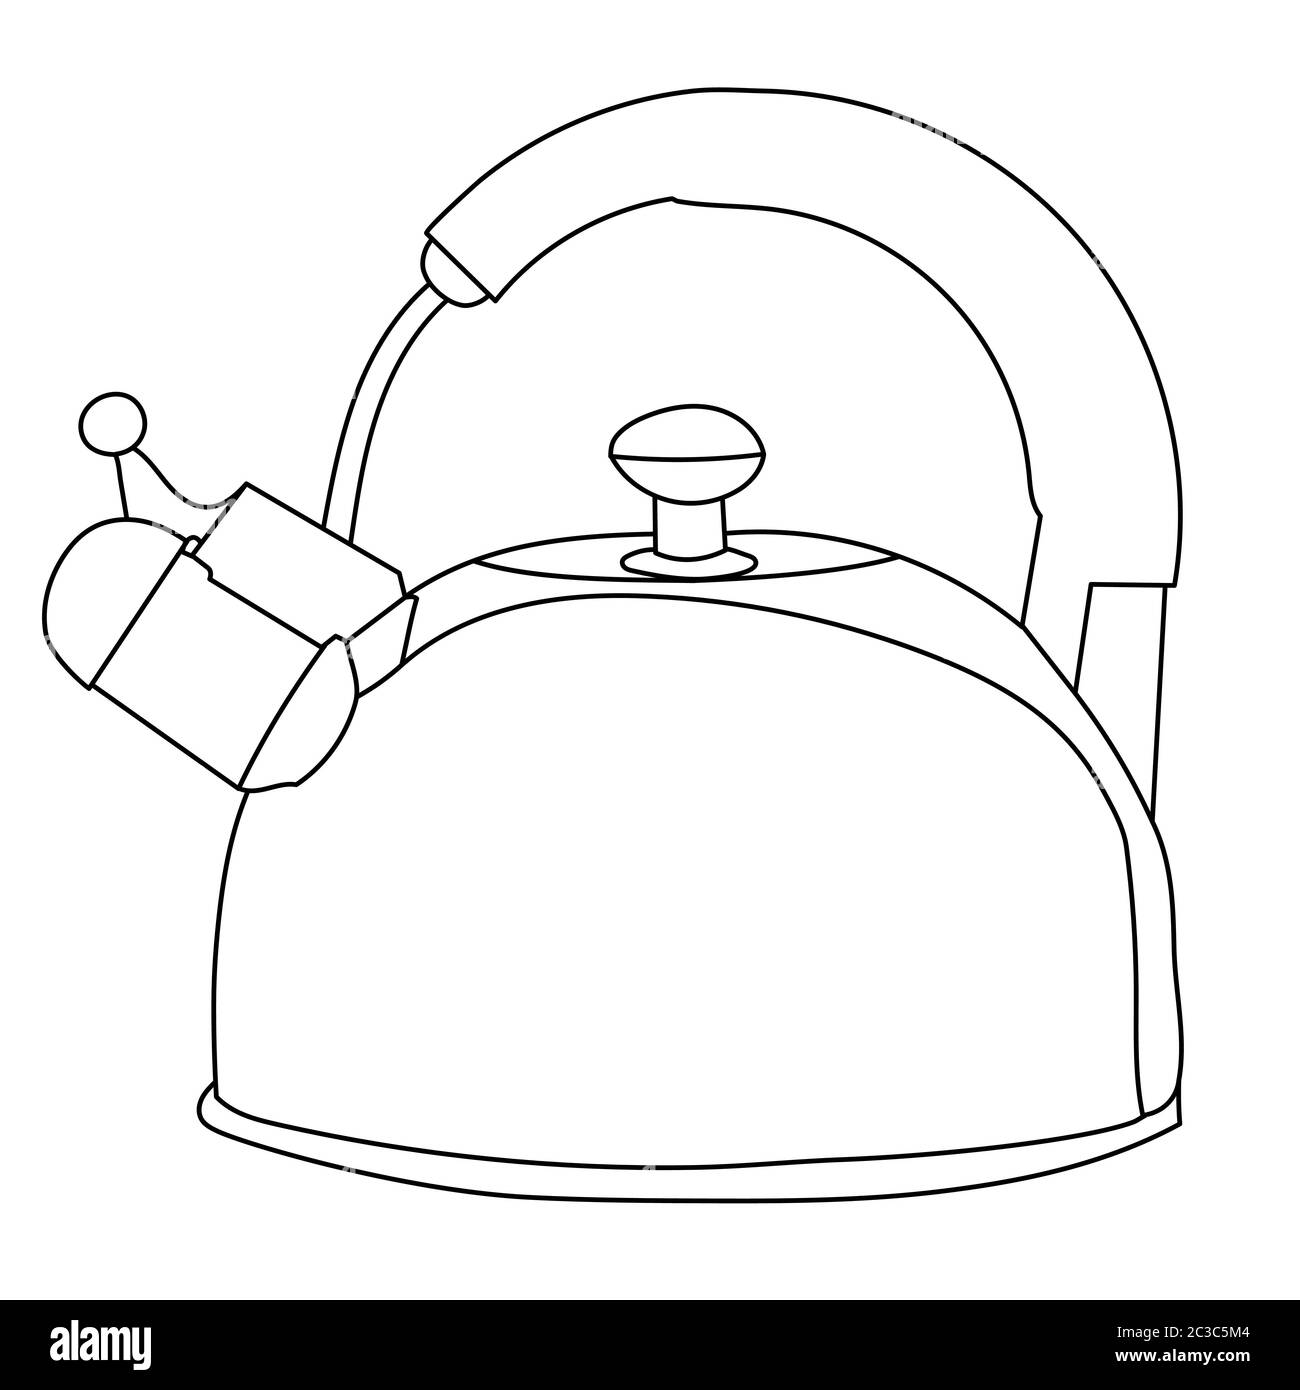 white background, sketch kettle with handle for stove Stock Vector